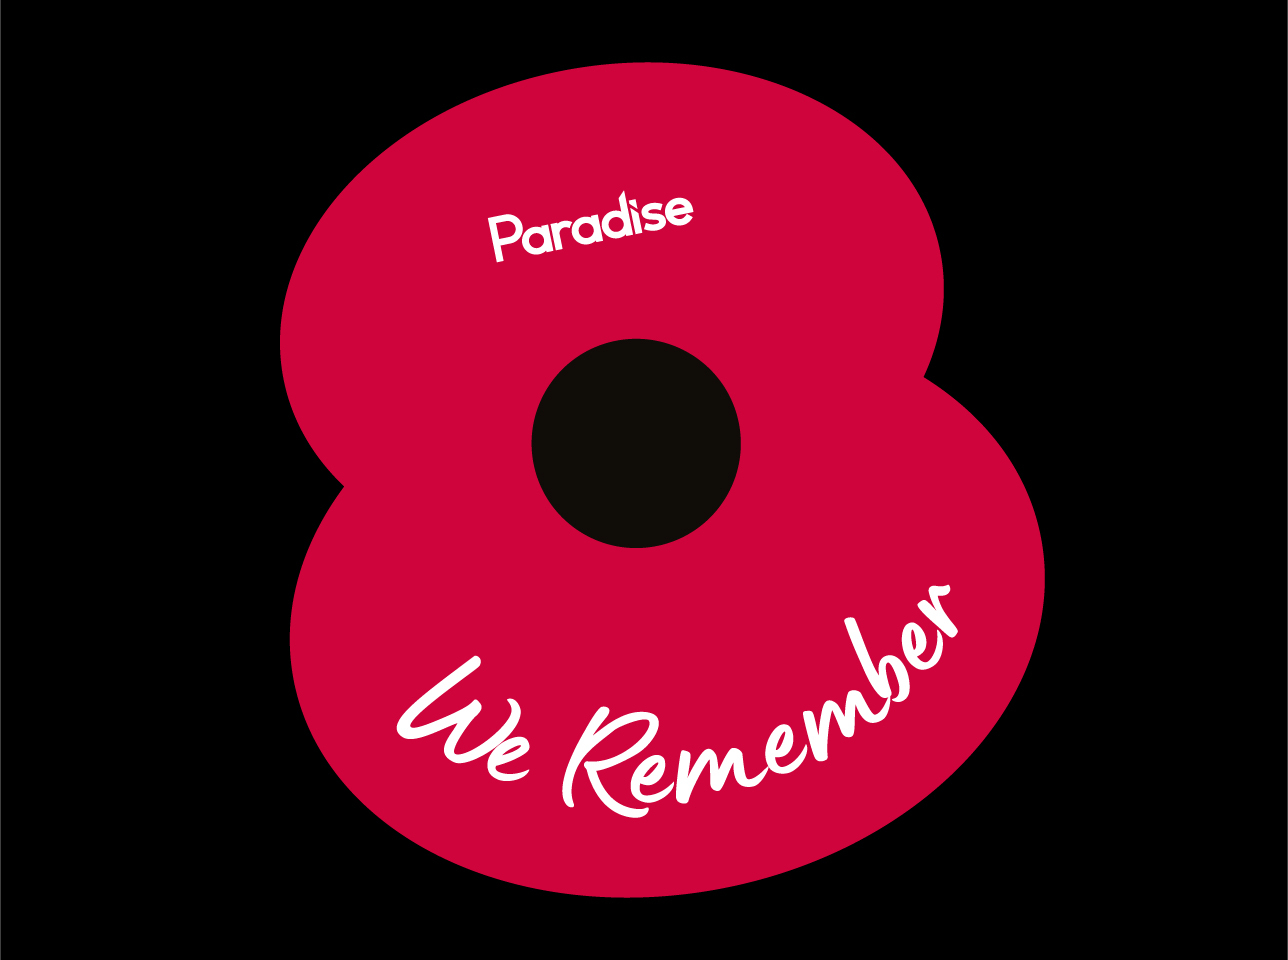 A red poppy on a black background with the words 'We Remember'.